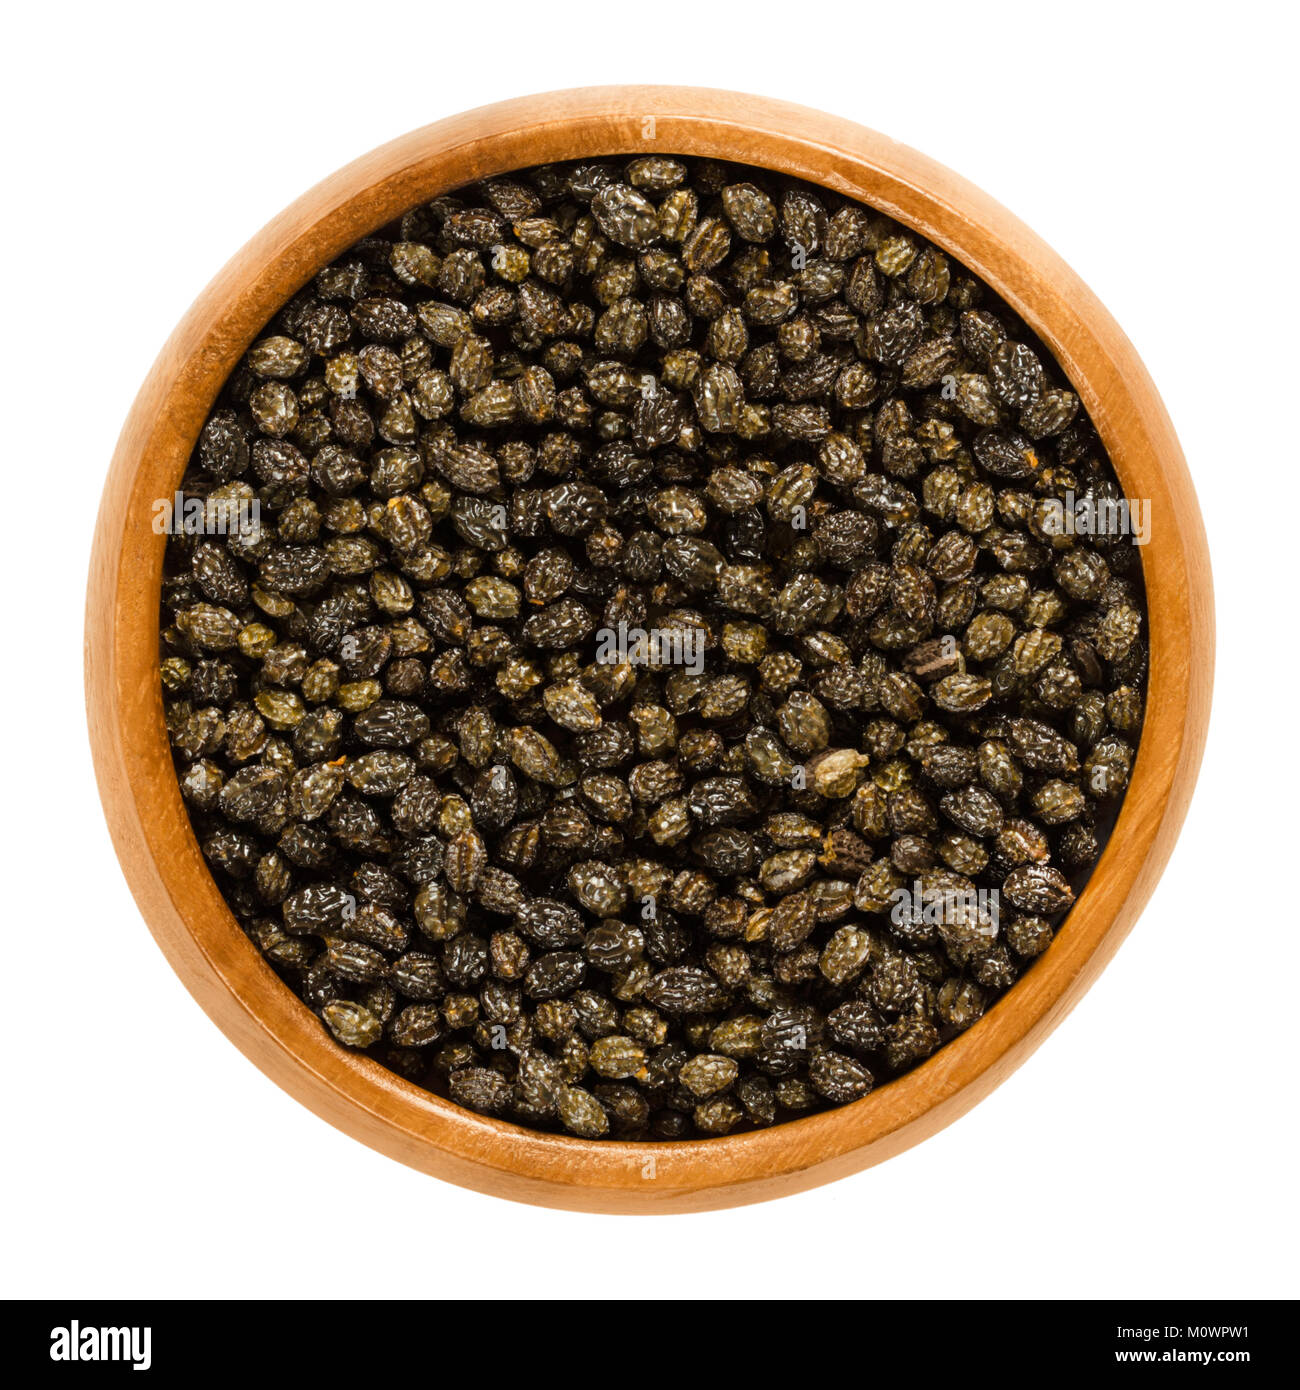 Dried black papaya seeds in wooden bowl. Edible, with sharp, spicy taste, a substitute for pepper and to defeat parasites. Carica papaya. Macro photo. Stock Photo